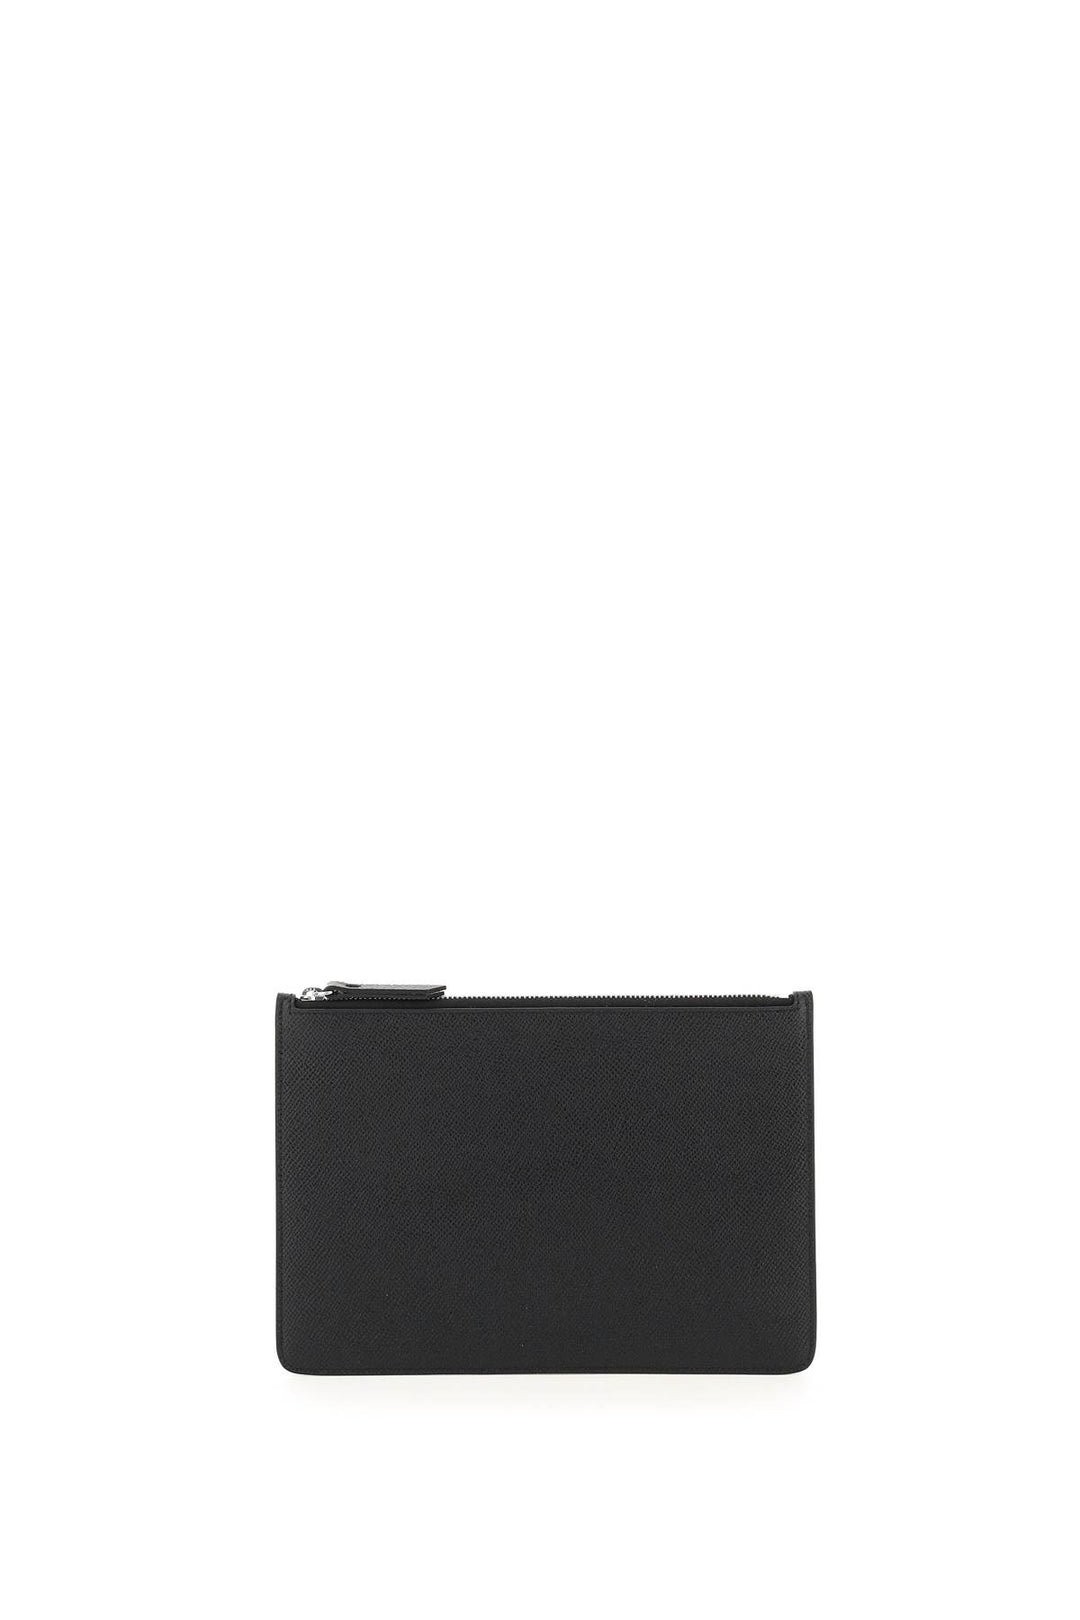 Maison Margiela Grained Leather Small Pouch   Nero